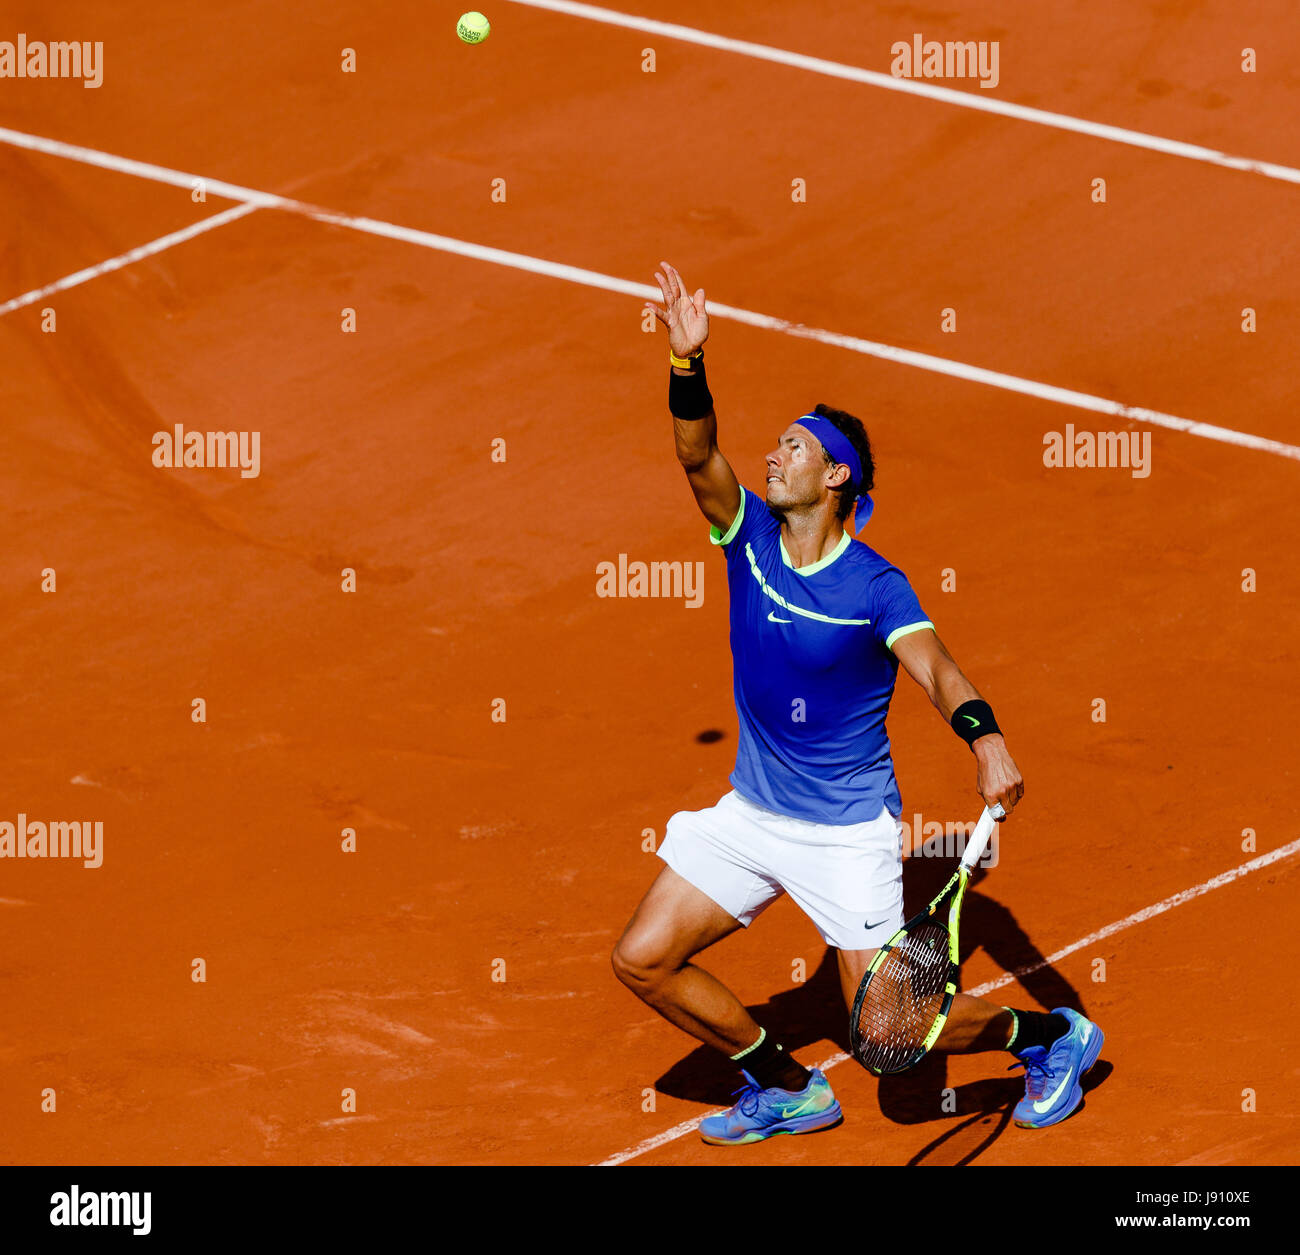 Paris, France, 31 May 2017: Rafael Nadal is in action during his second  round match at the 2017 Tennis French Open in Roland Garros Paris. Credit: Frank Molter/Alamy Live News Stock Photo